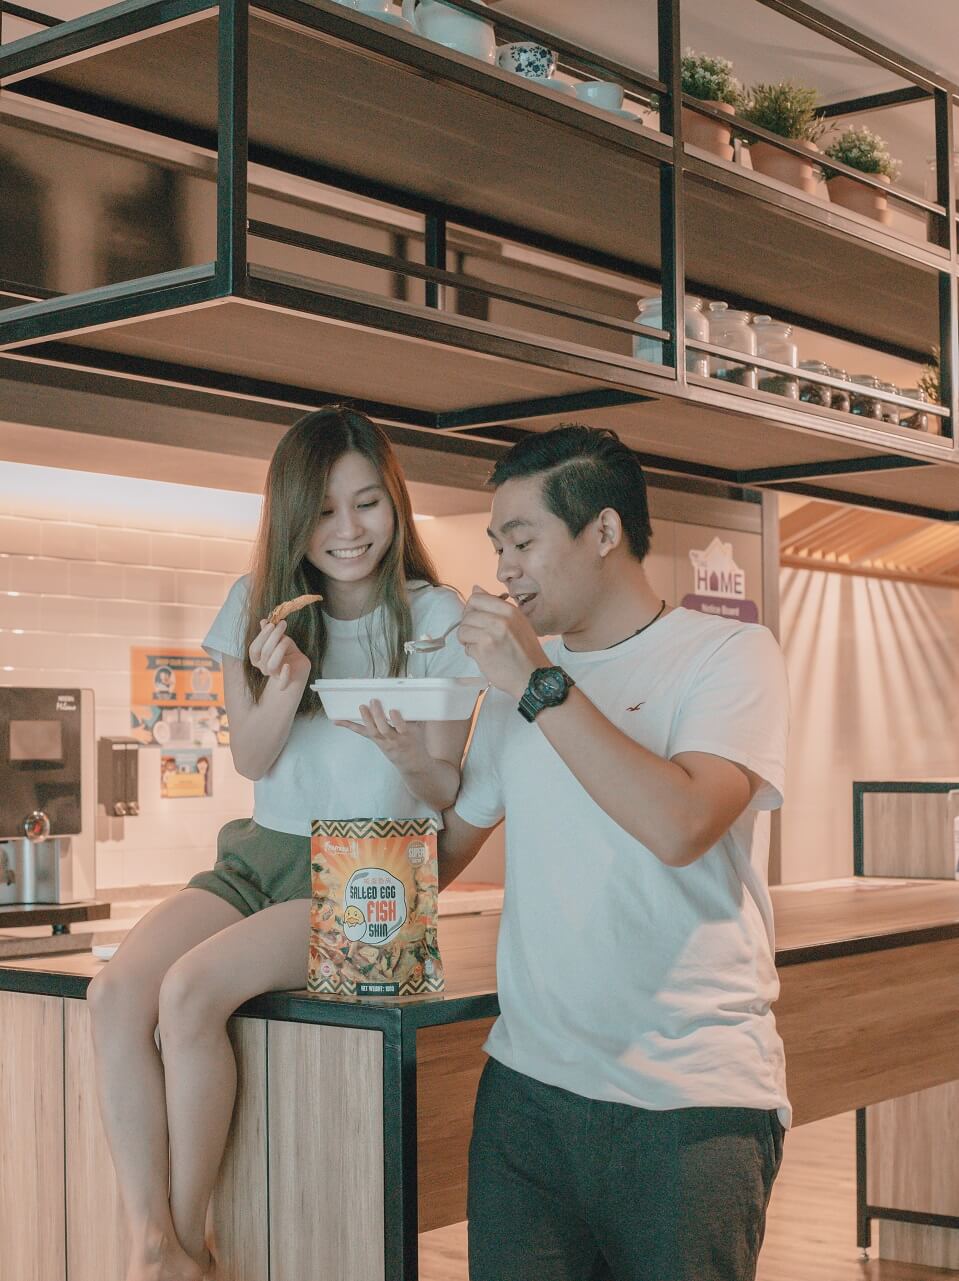 A man and woman enjoying some snacks in a kitchen setting.